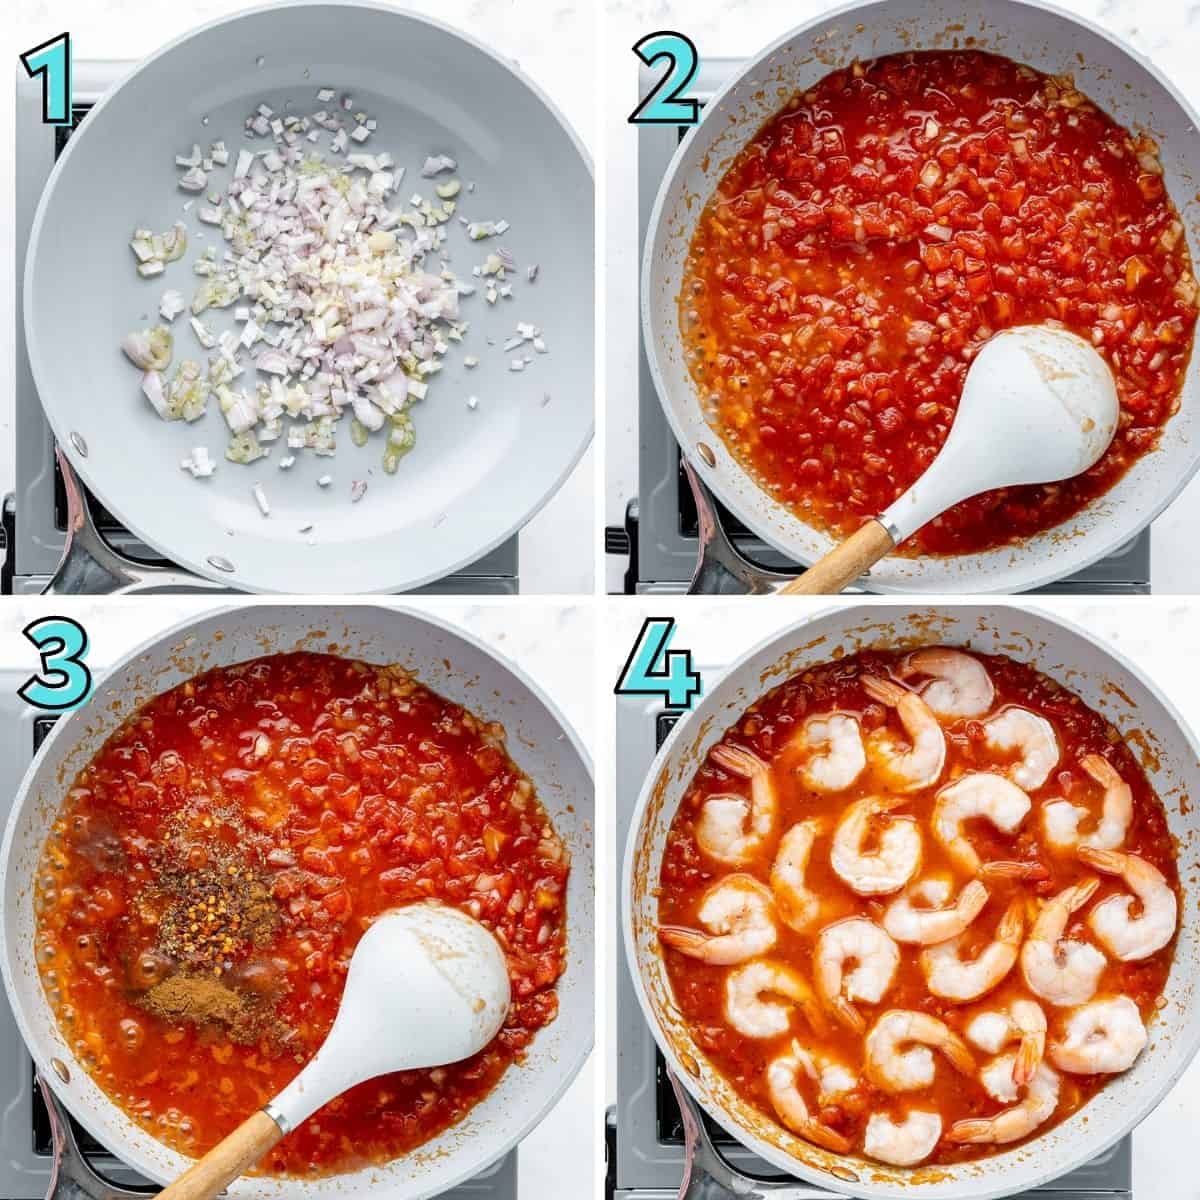 Step by step instructions to prepare shrimp saganaki, in a collage.